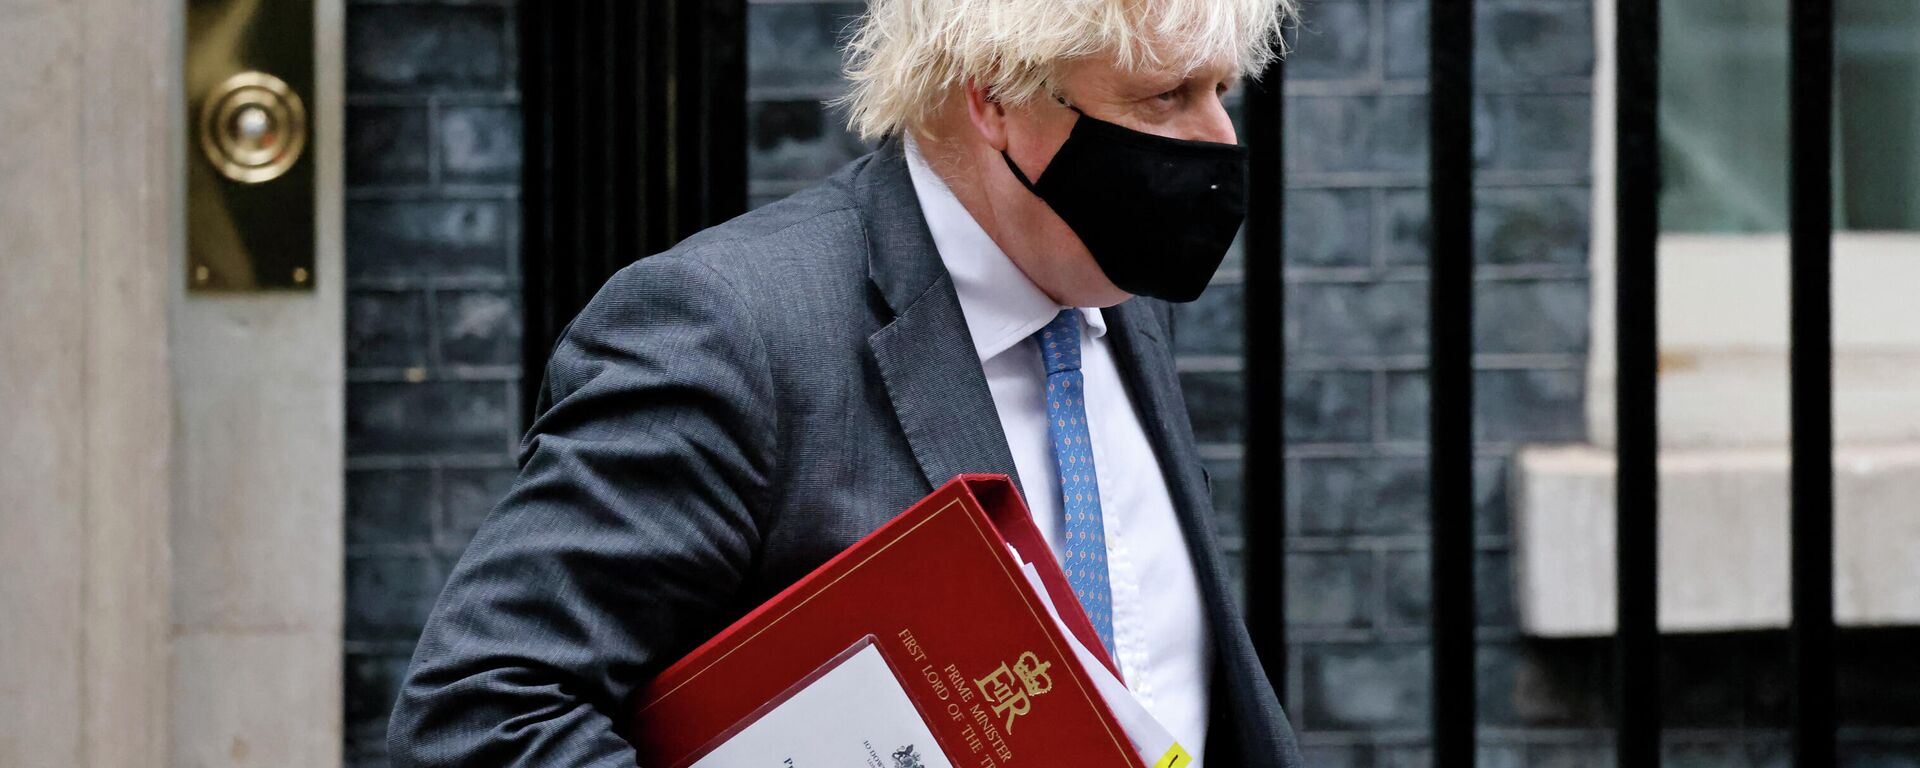 Britain's Prime Minister Boris Johnson, wearing a face covering to stop the spread of coronavirus, carries his notes in a ministerial folder as he leaves from 10 Downing Street in central London on December 15, 2021, to take part in the weekly session of Prime Minister Questions (PMQs) at the House of Commons - Sputnik International, 1920, 20.01.2022